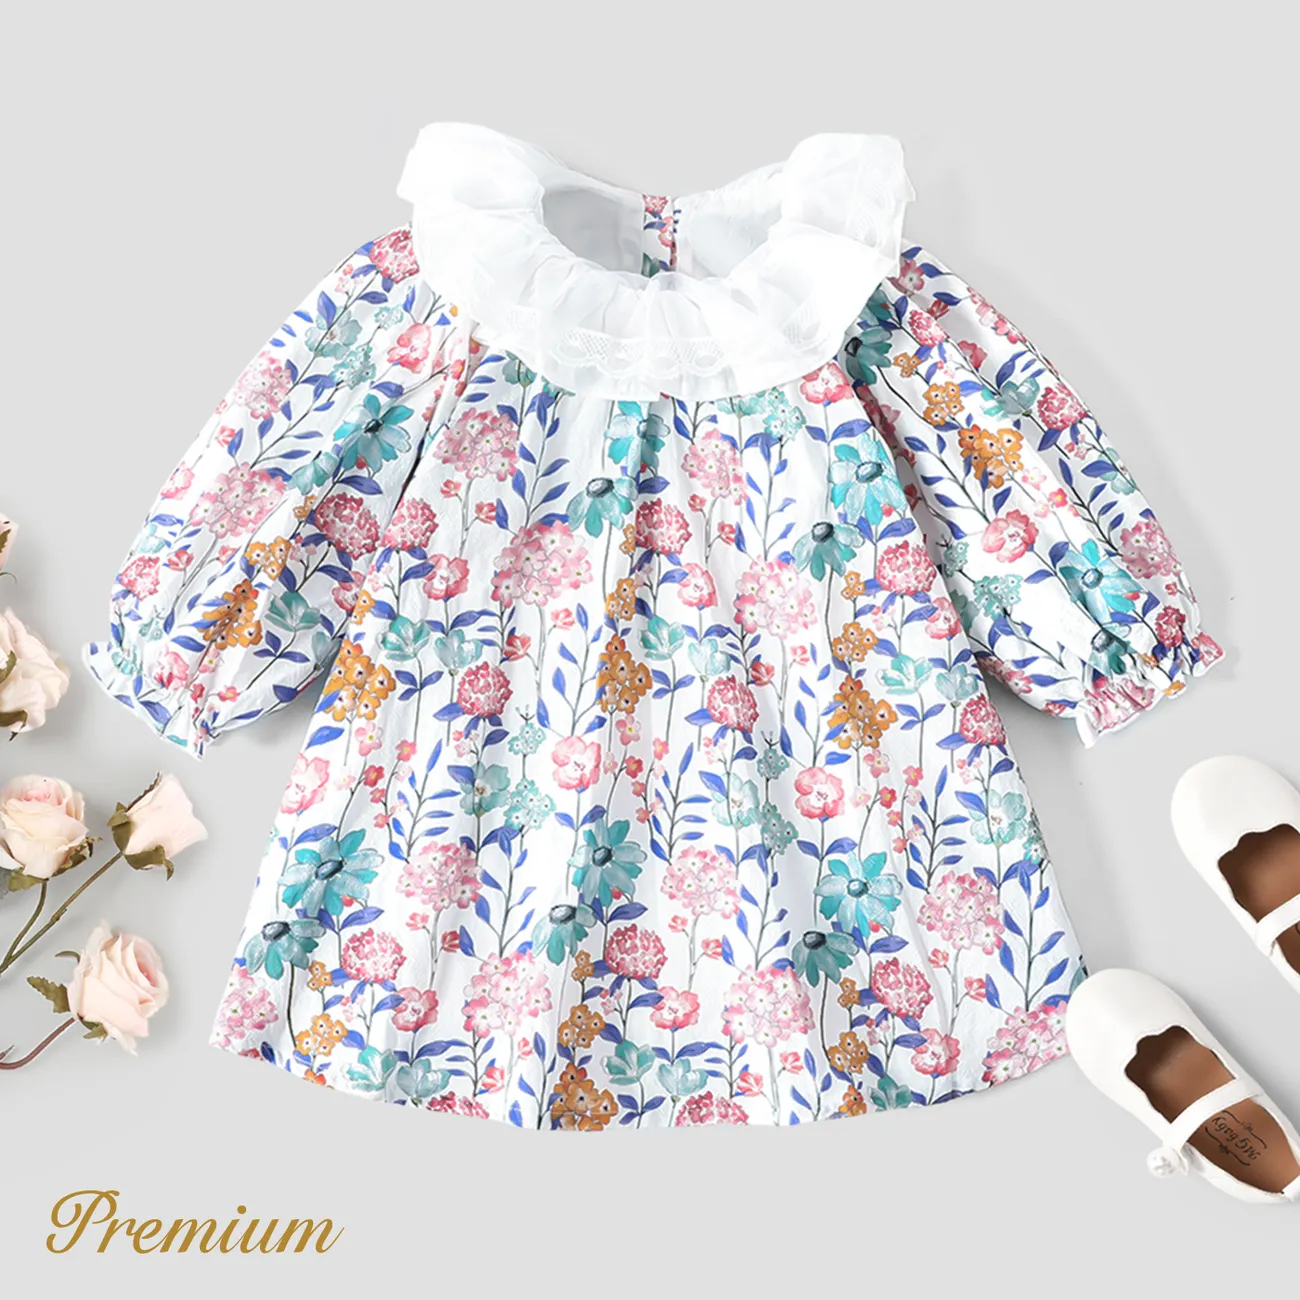 100% Cotton Medium Thickness Long Sleeves Elegant Baby Girl Dress with Puff Sleeves and Floral Pattern  big image 1